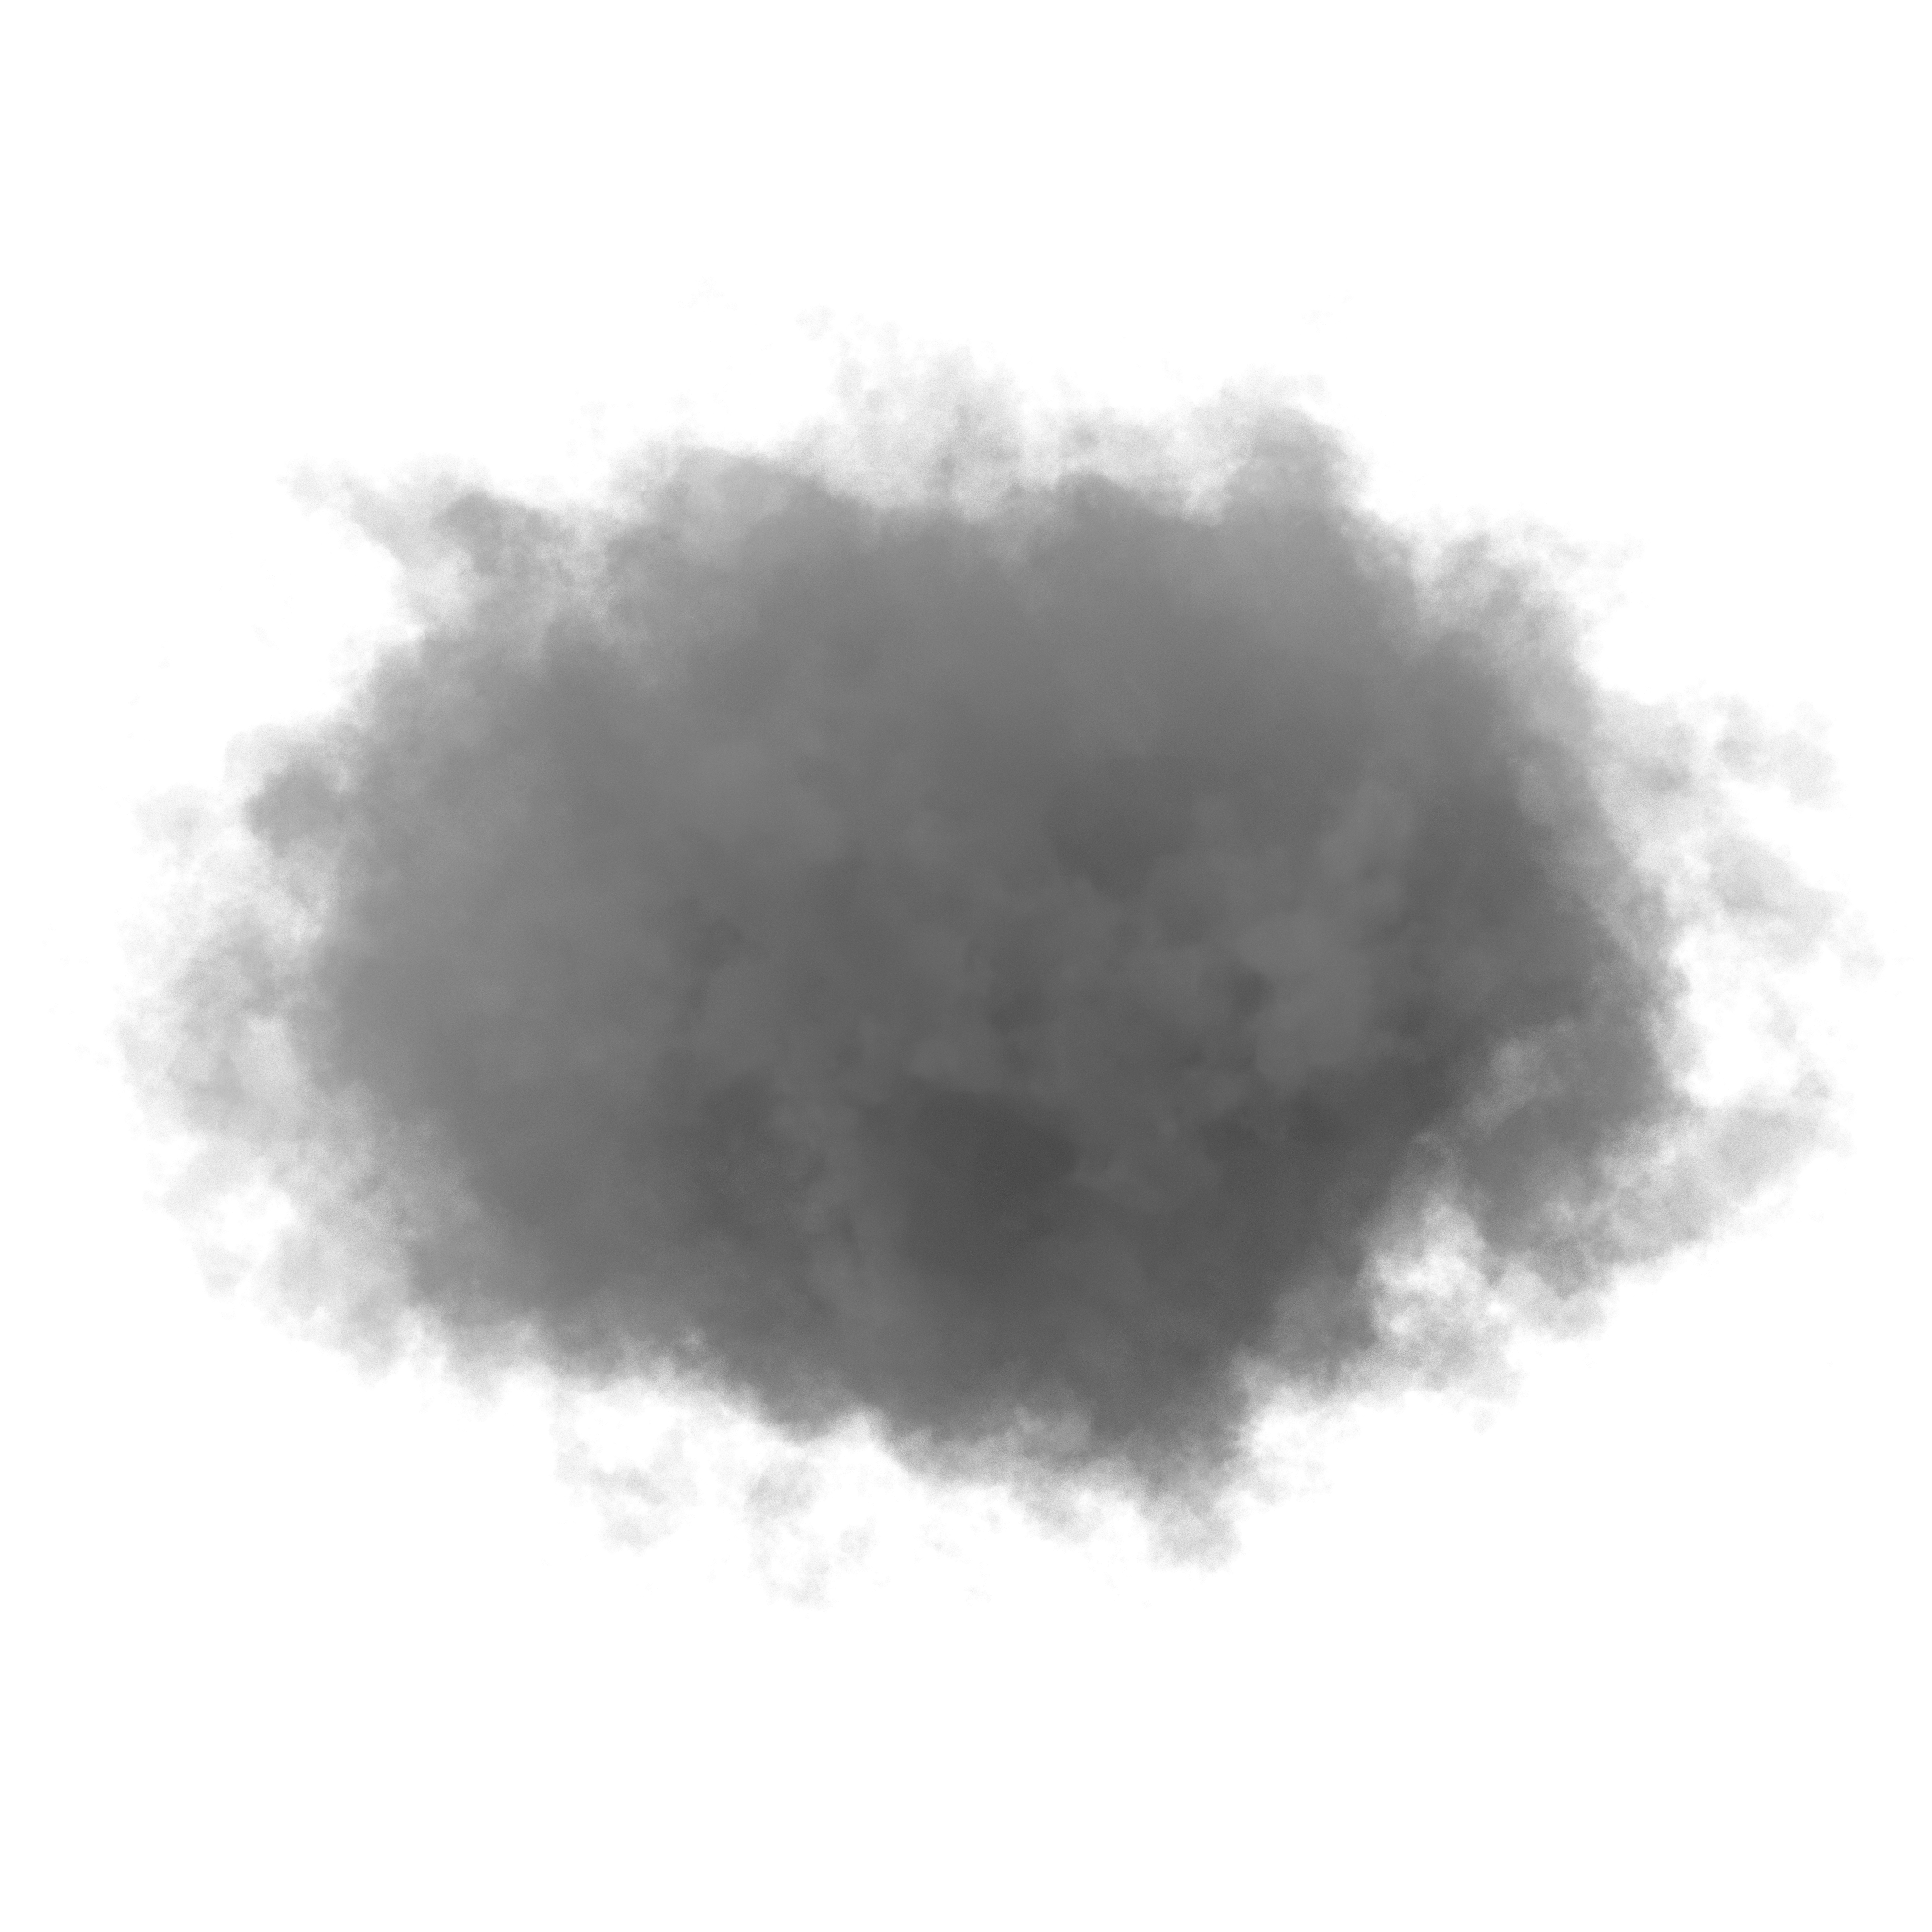 Clouds with Transparency - FX_CloudAlpha03.png | OpenGameArt.org